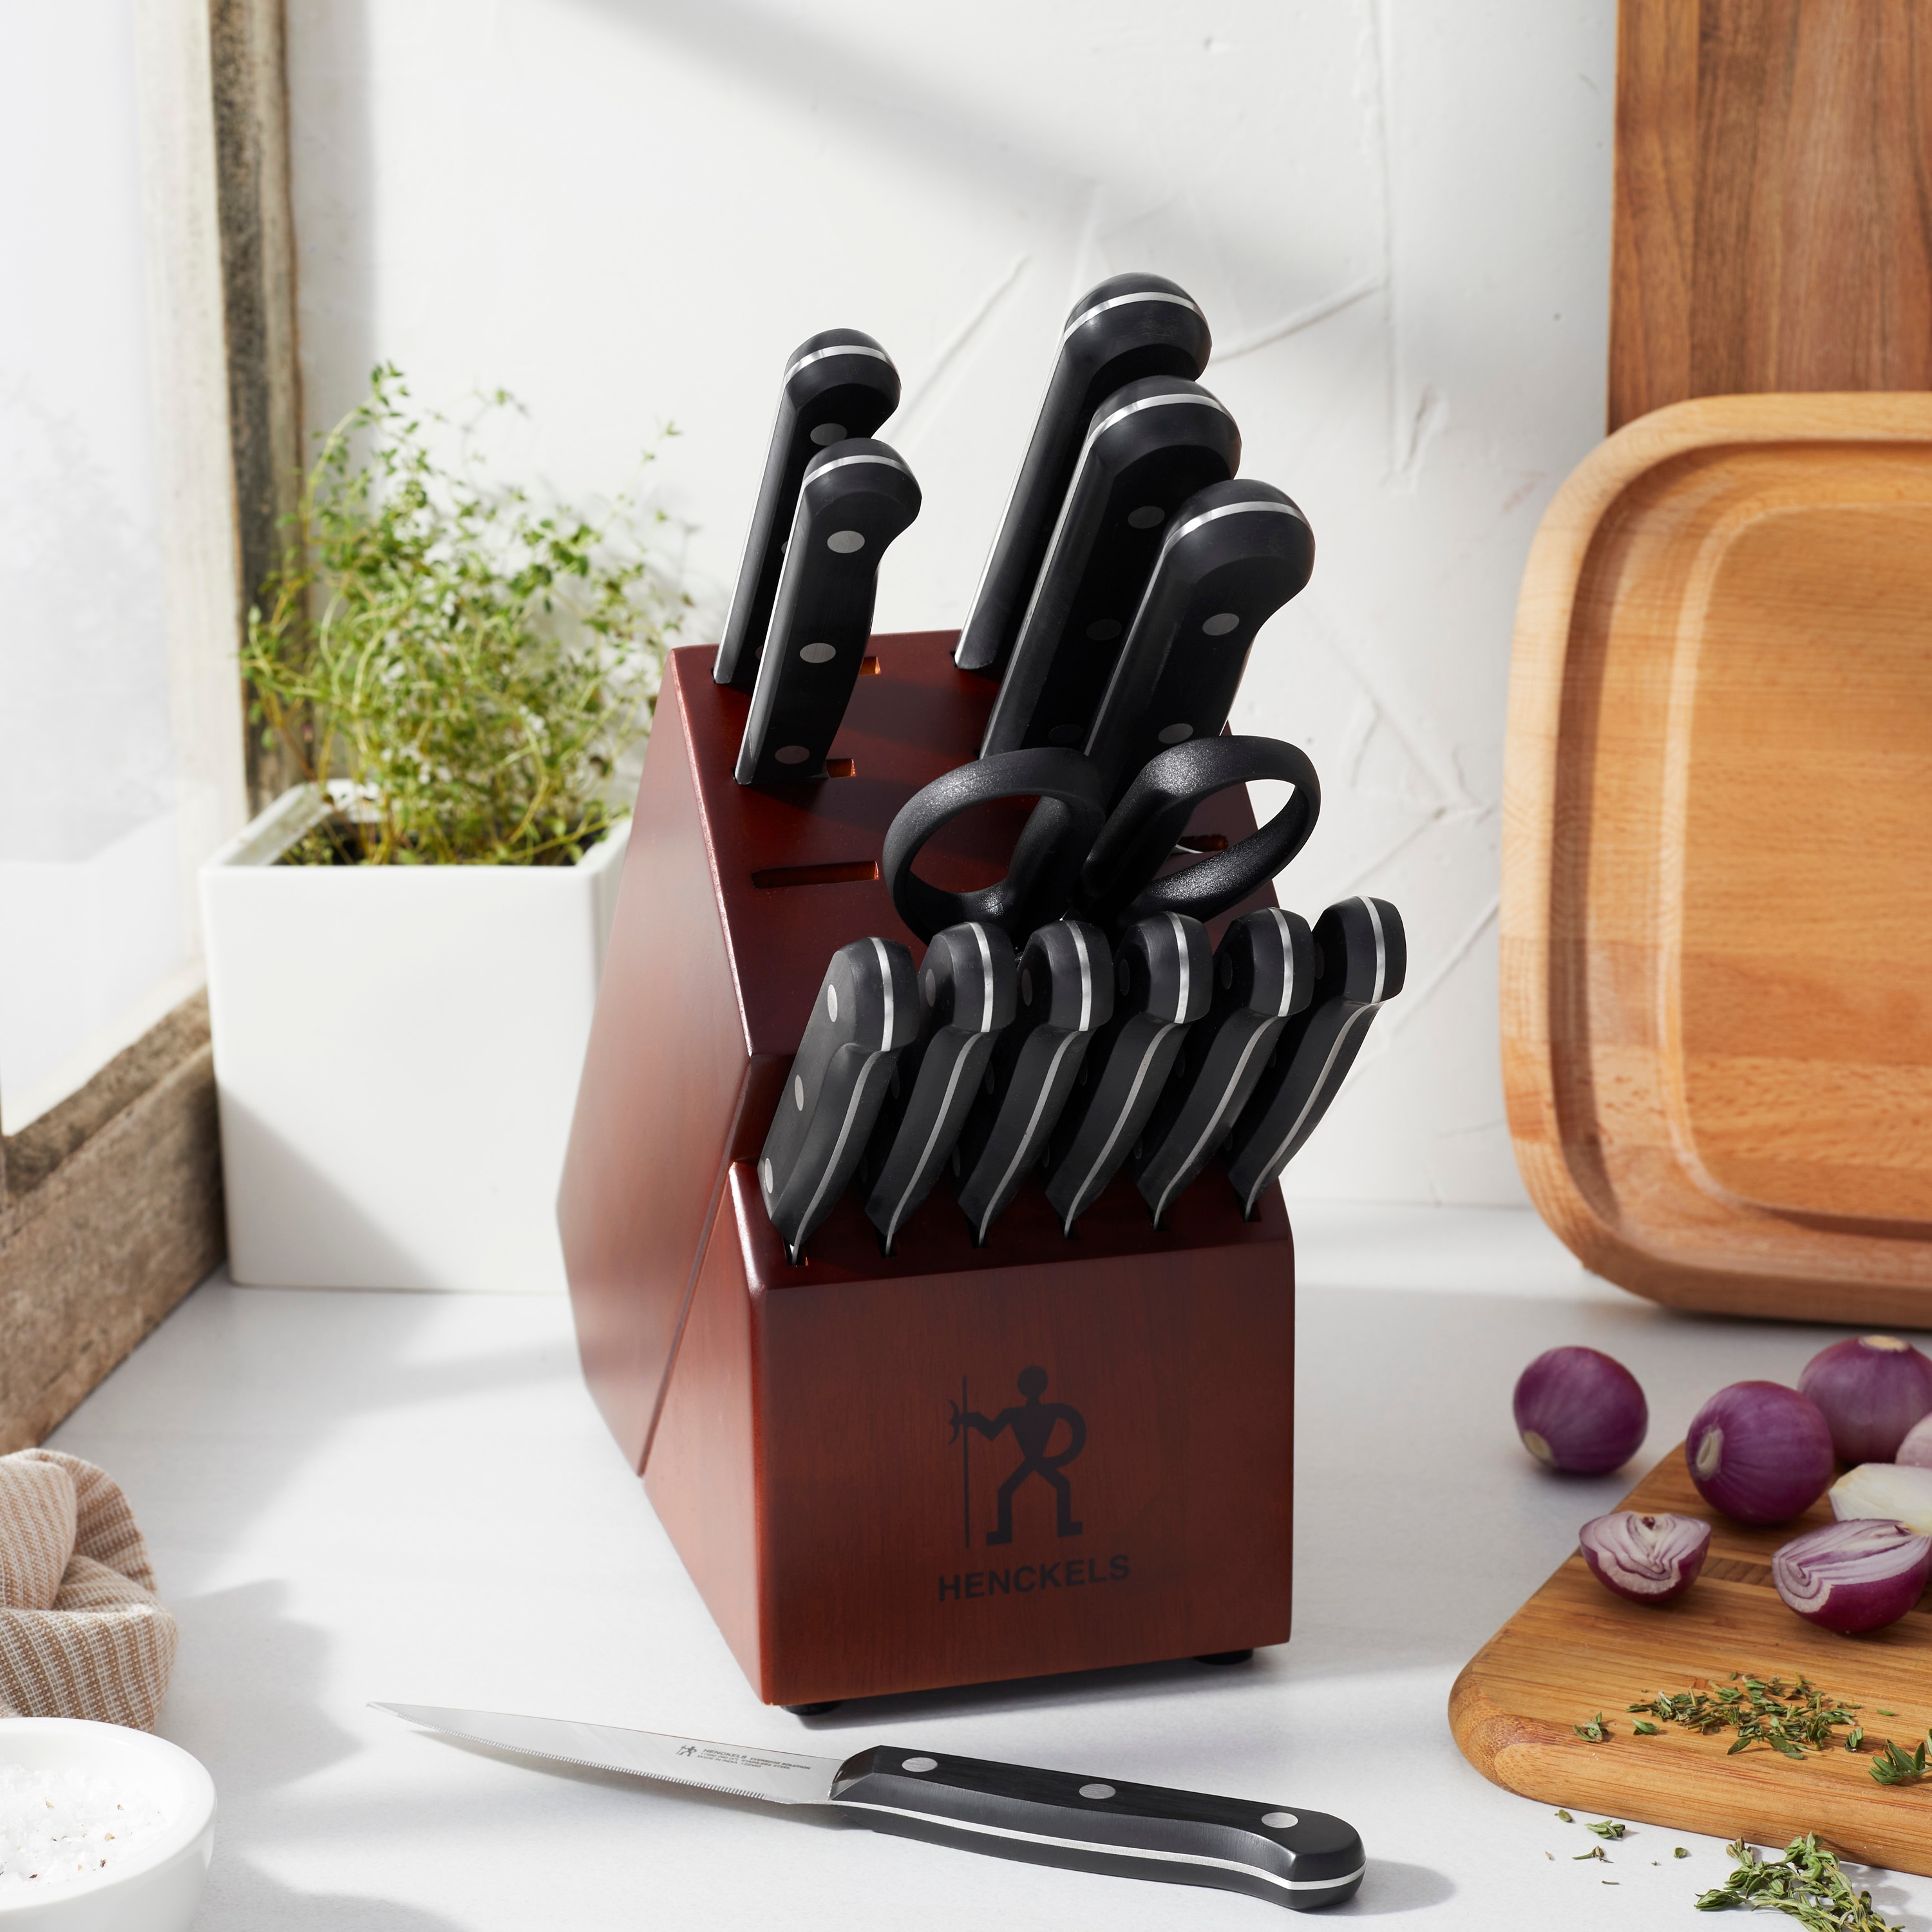 https://ak1.ostkcdn.com/images/products/is/images/direct/c1e2f1224fbff5fd2bbbd7854ad106b2410fb988/Henckels-Everedge-Solution-14-pc-Knife-Block-Set.jpg